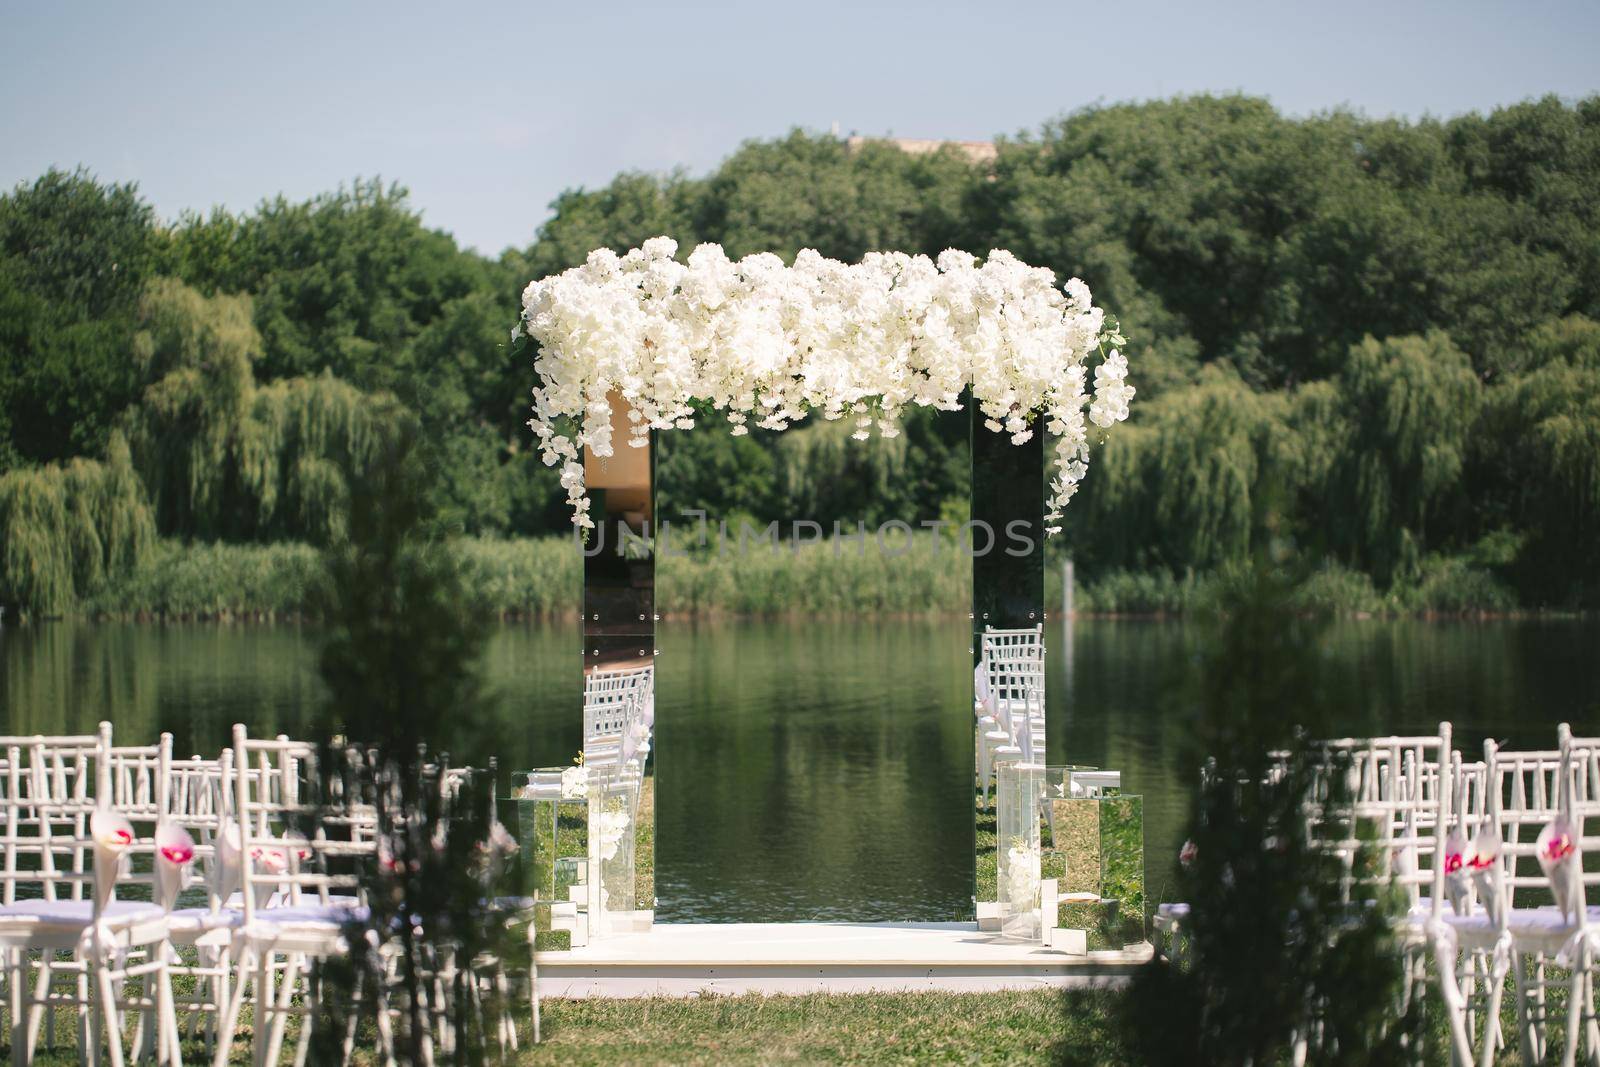 White mirrored wedding arch decorated with white flowers. The concept of an outdoor wedding ceremony venue.